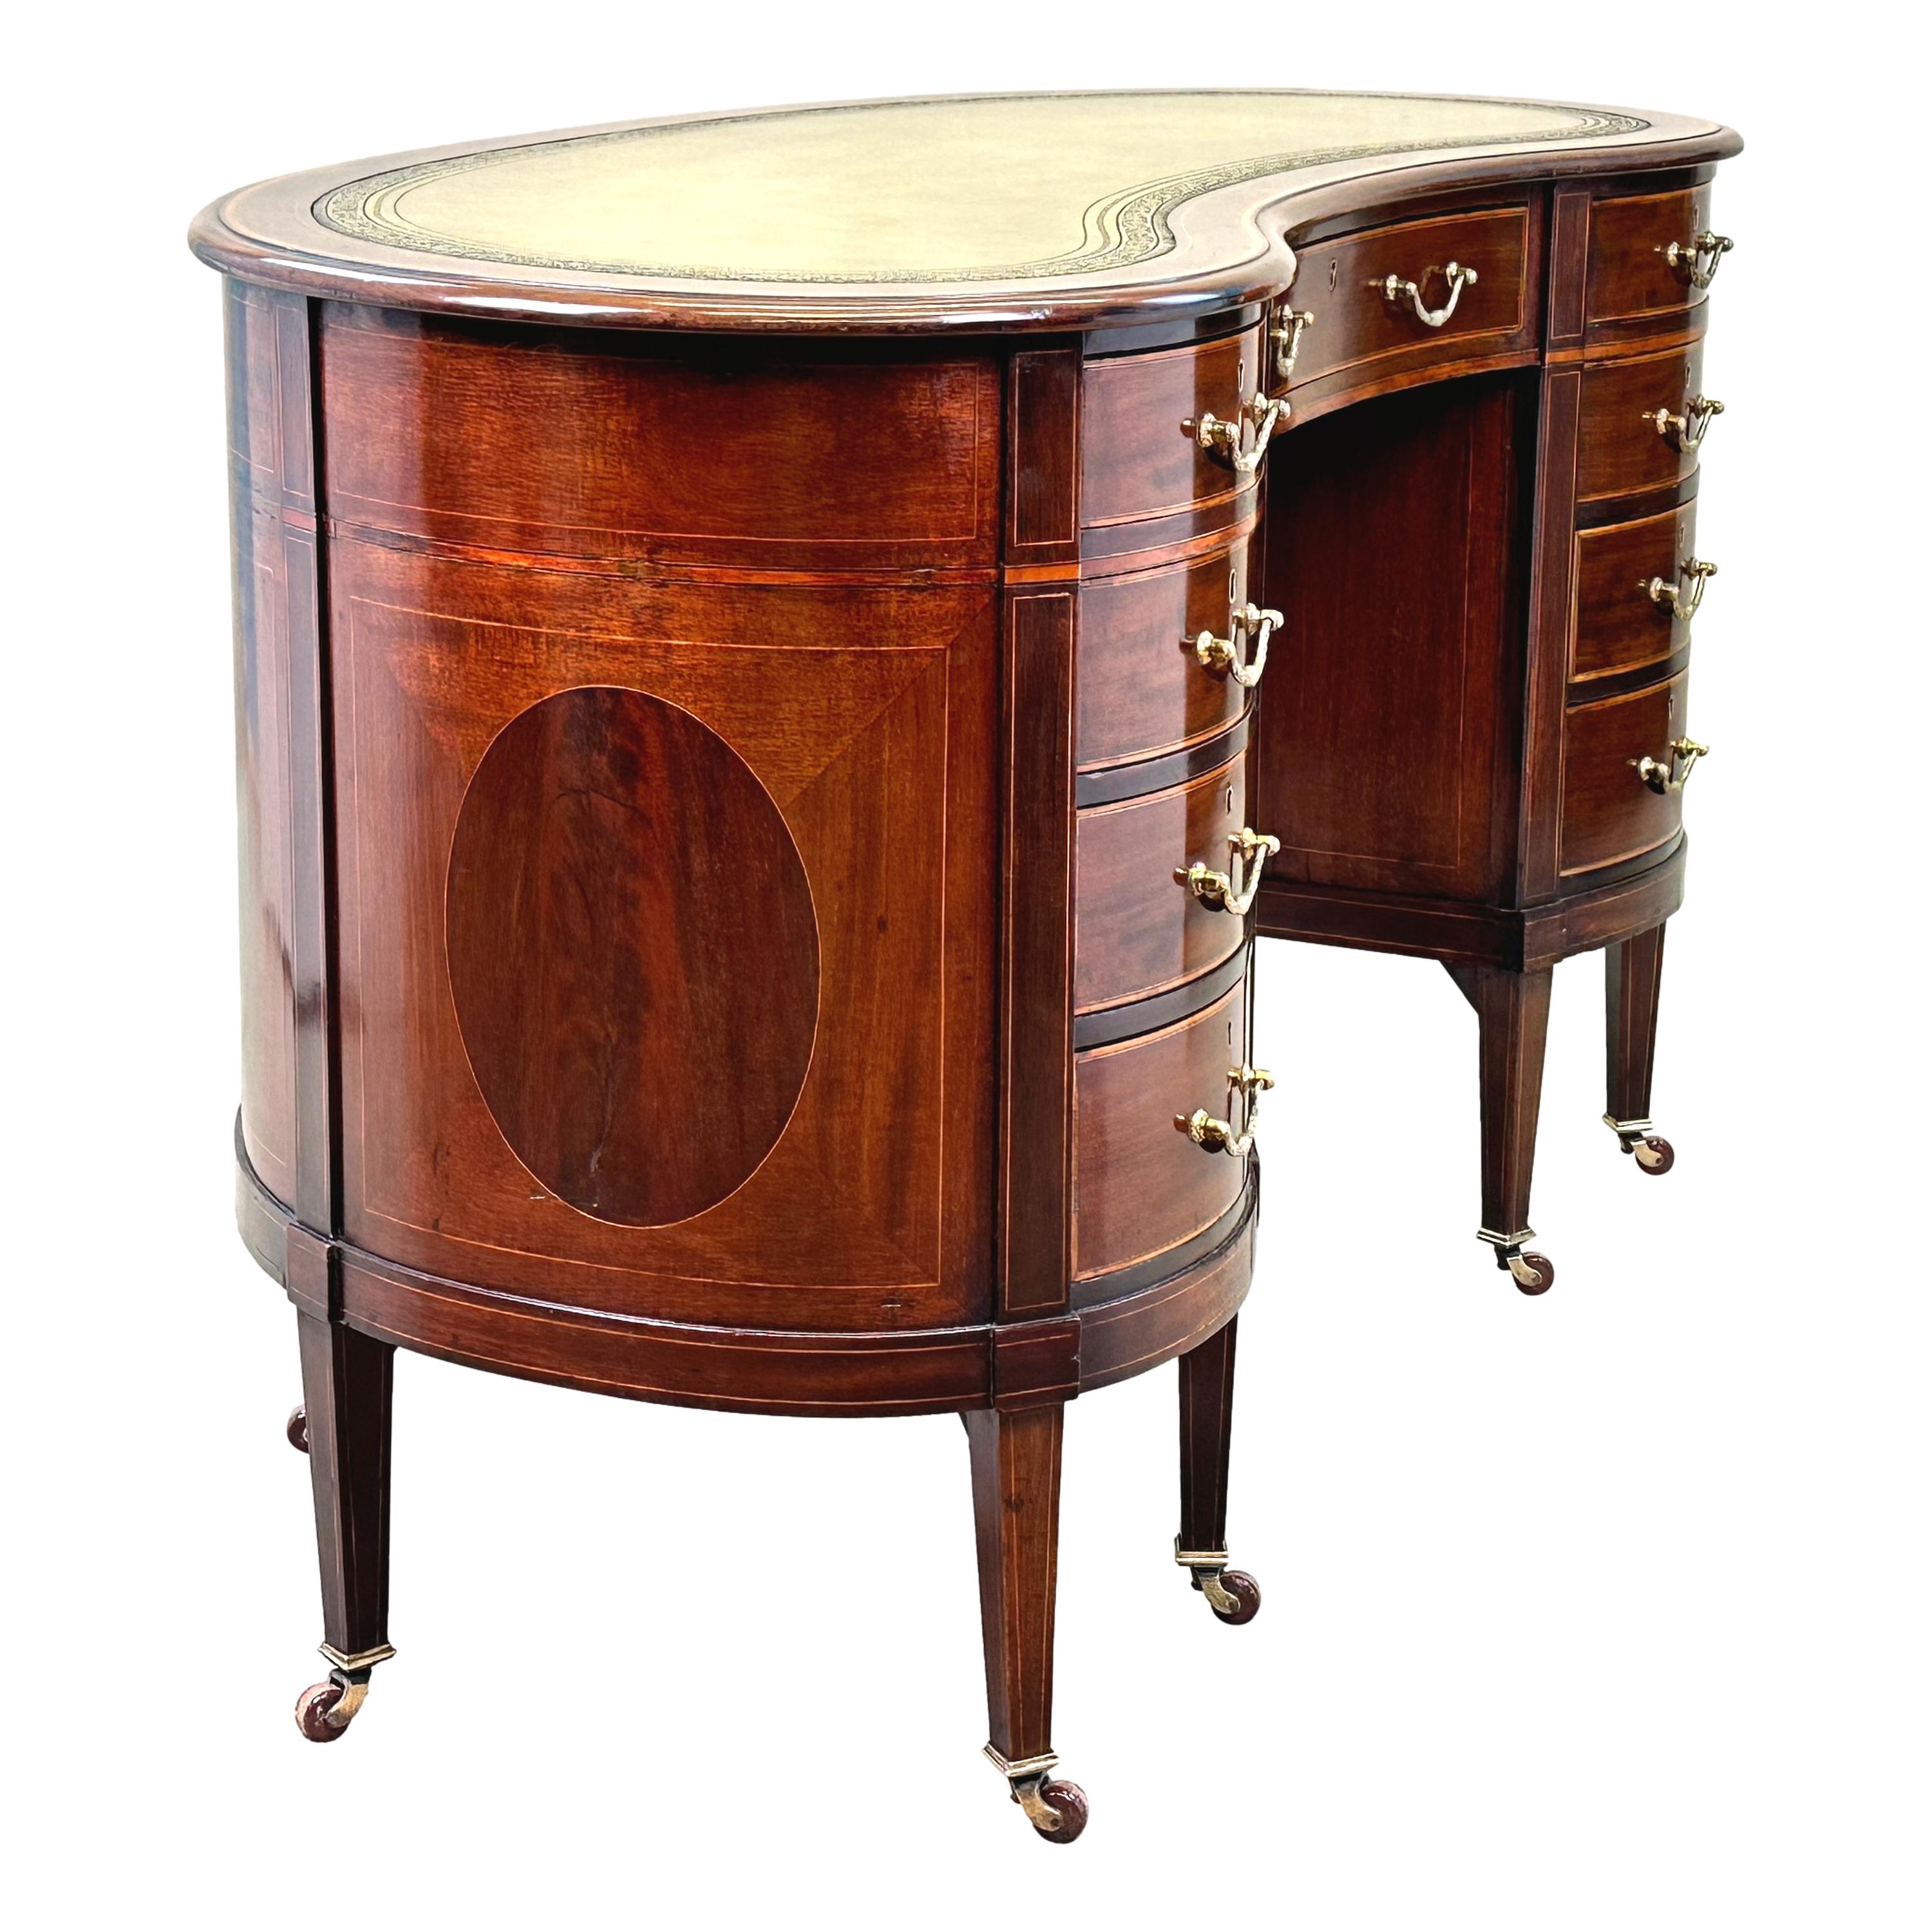 A Fine Quality Late 19th Century Mahogany Kidney Shaped Desk, or Dressing Table, Having Attractive Replacement Tooled Leather Inset Top Over Nine Drawers With Original Brass Handles, Boasting Attractive Inlaid And Banded Decoration Throughout,